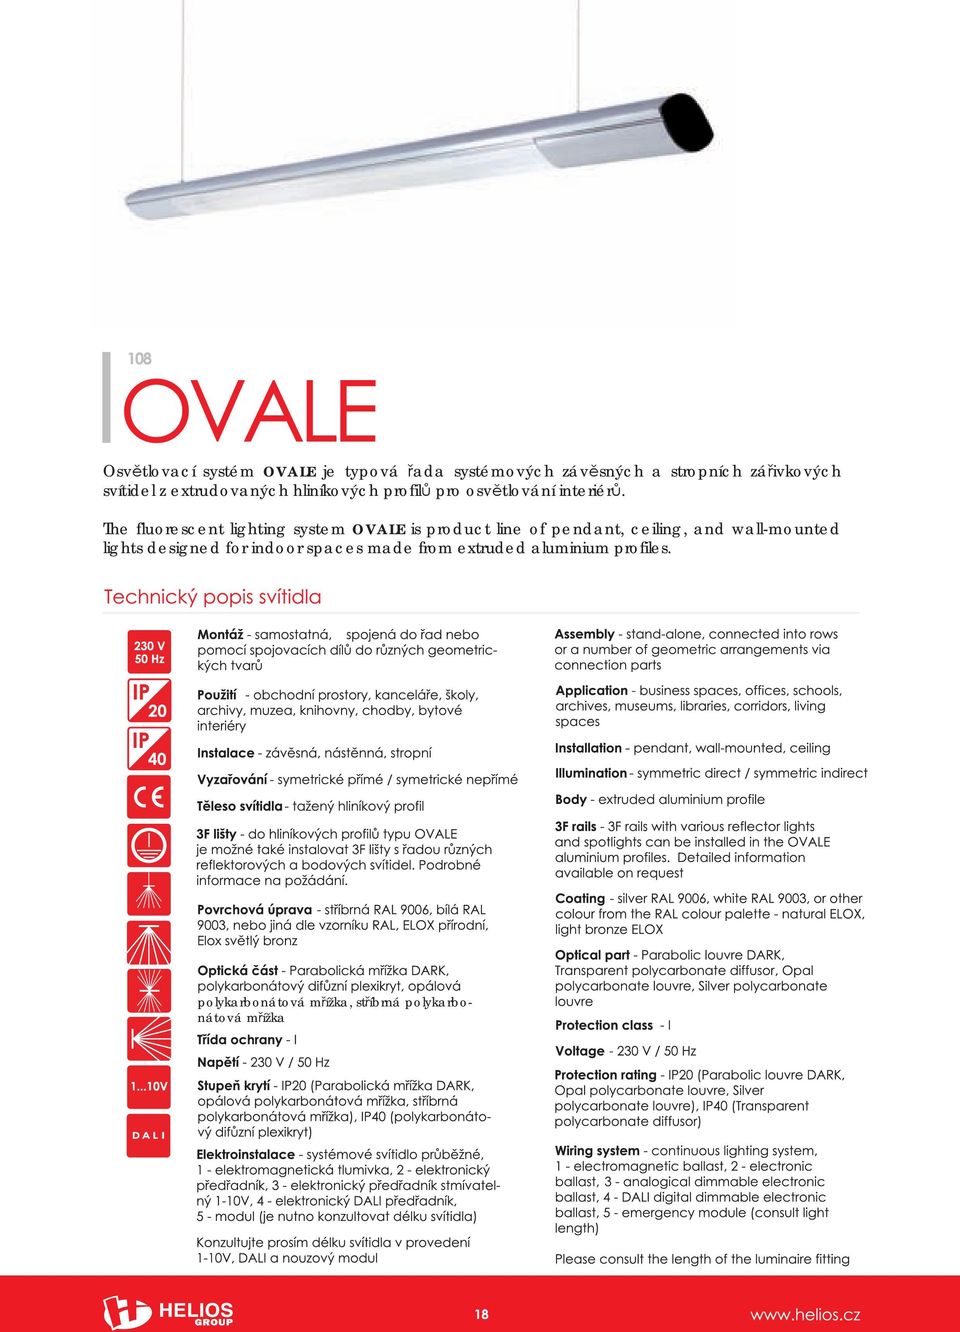 Te fluorescent ligting system OVALE is product line of pendant, ceiling, and wall-mounted